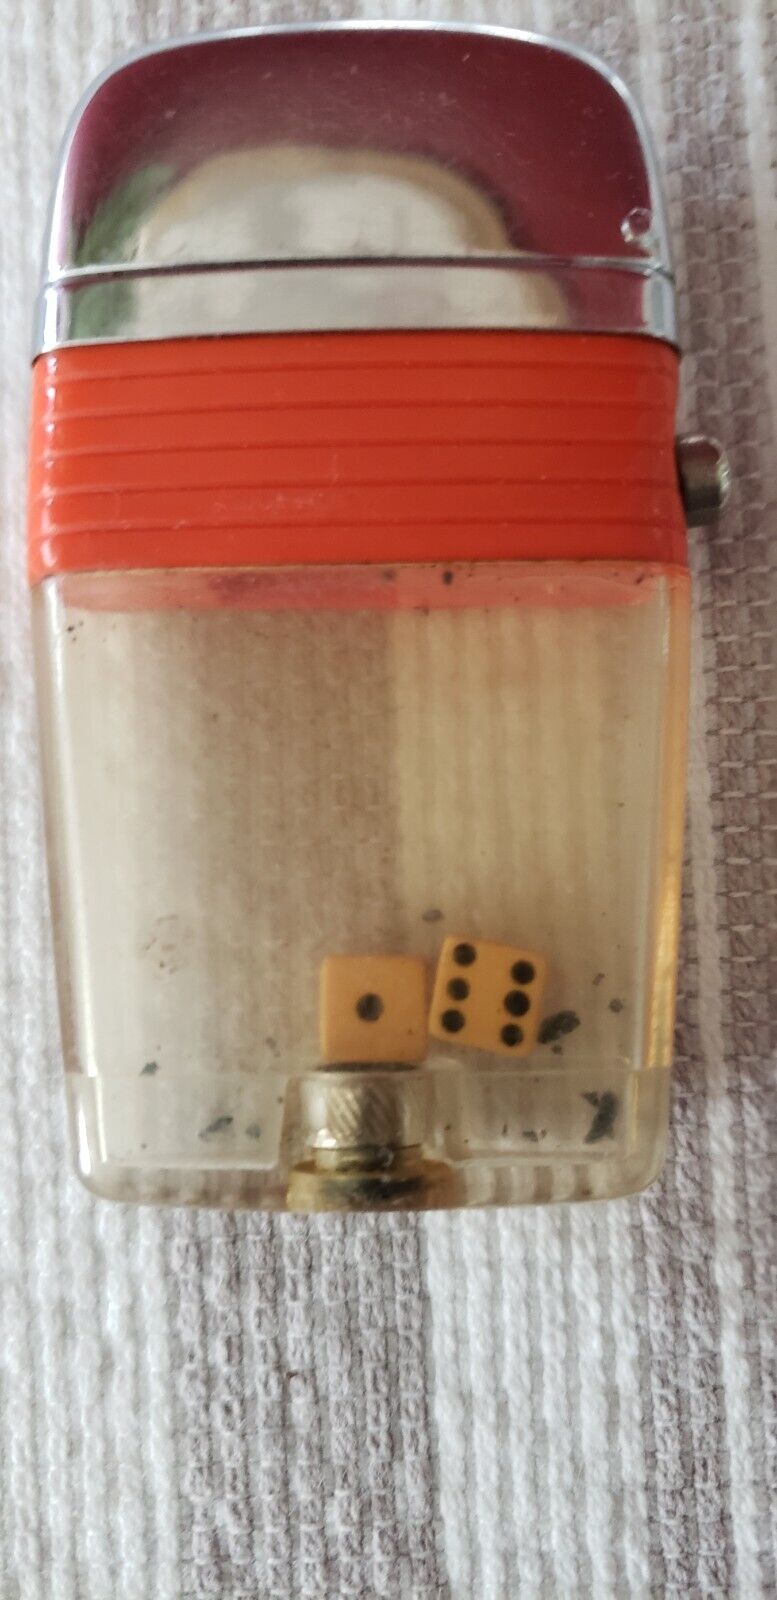 VINTAGE SCRIPTO VU LIGHTER WITH WHITE DICE INSIDE THICK ORANGE BAND WORKS GREAT